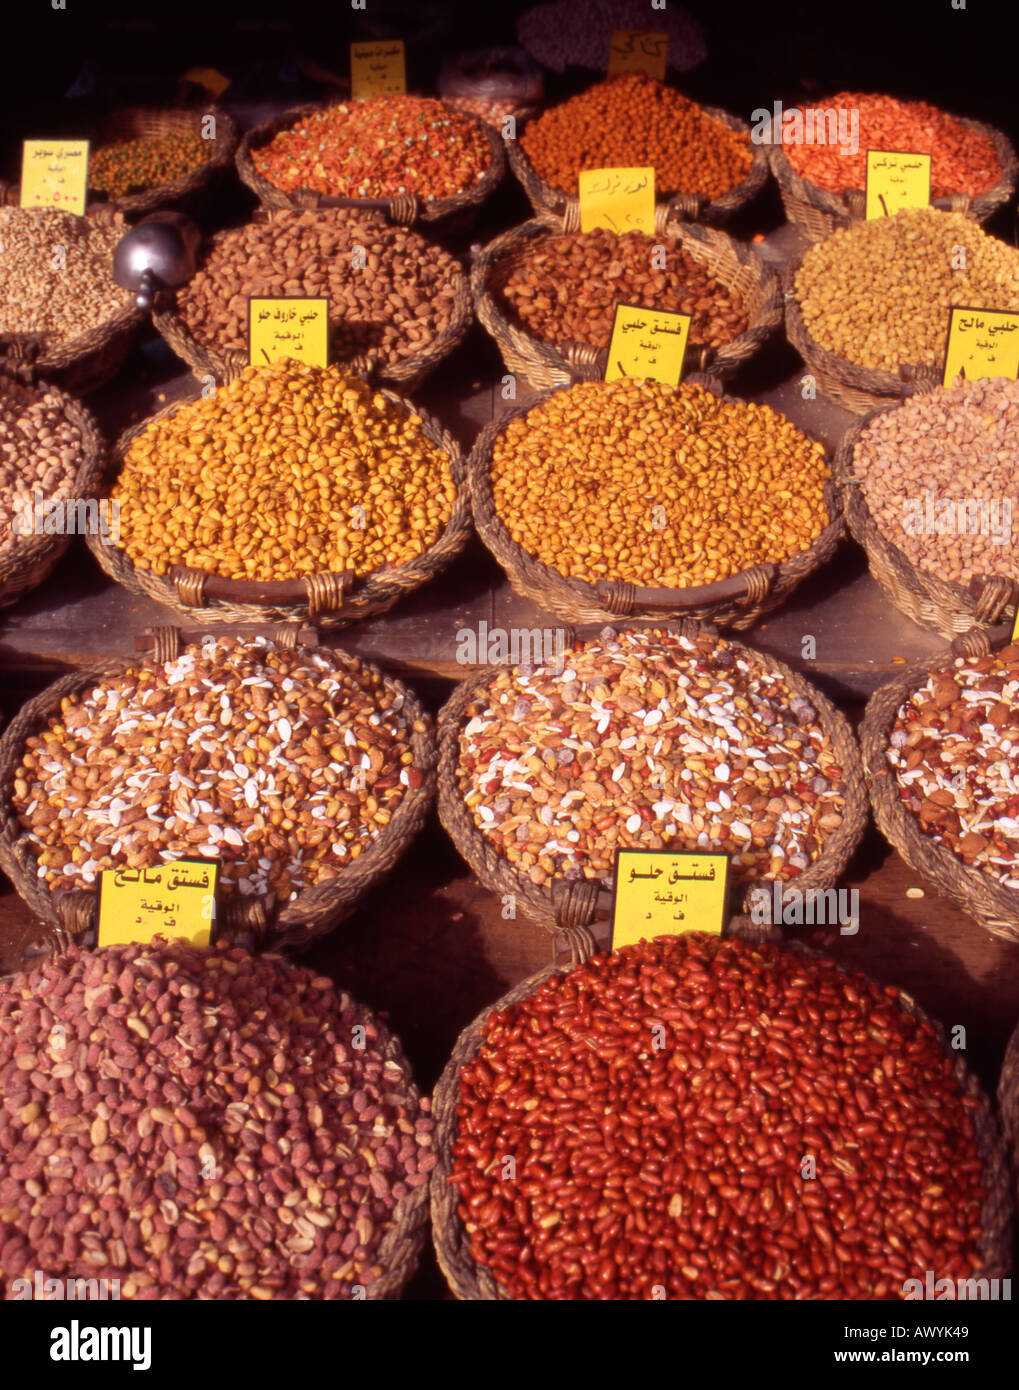 Baskets of nuts spices cereal and lentils in a shop in downtown Amman Jordan The Middle East Stock Photo